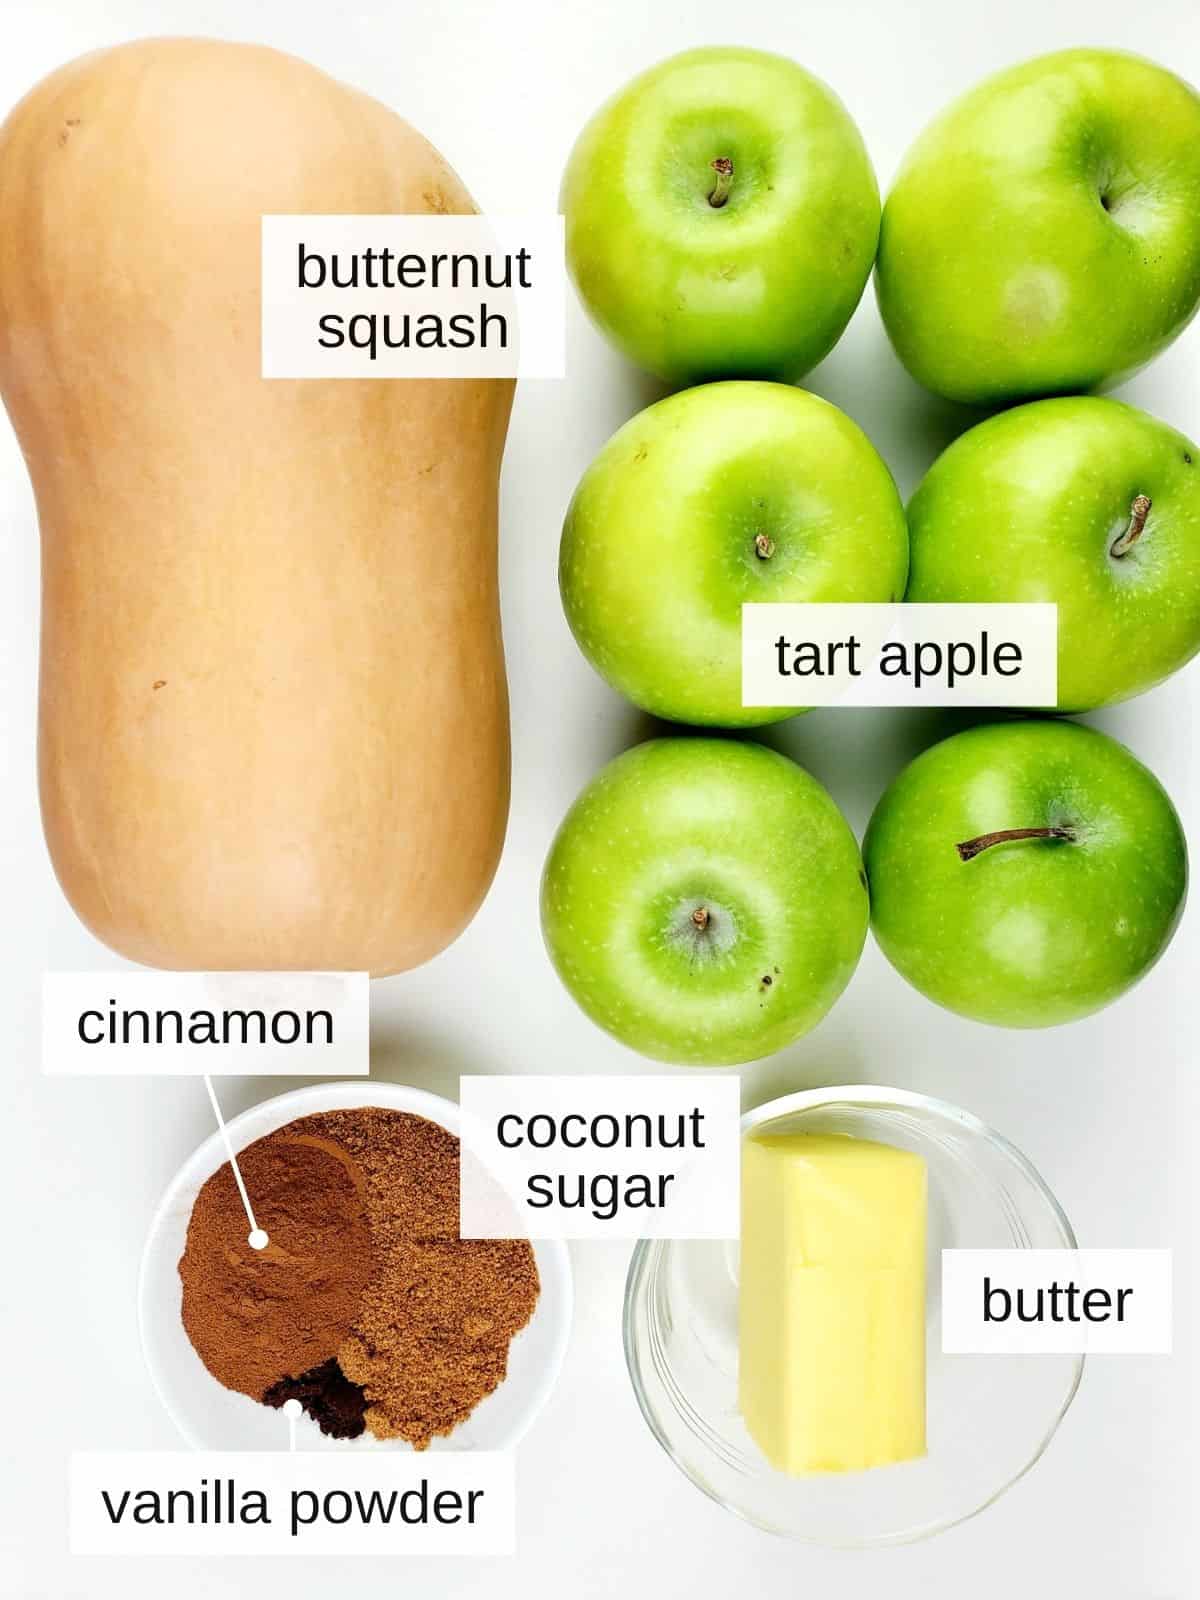 ingredients for butternut squash and apples, including vanilla powder, butter, coconut sugar, cinnamon, tart apples, and butternut squashes.